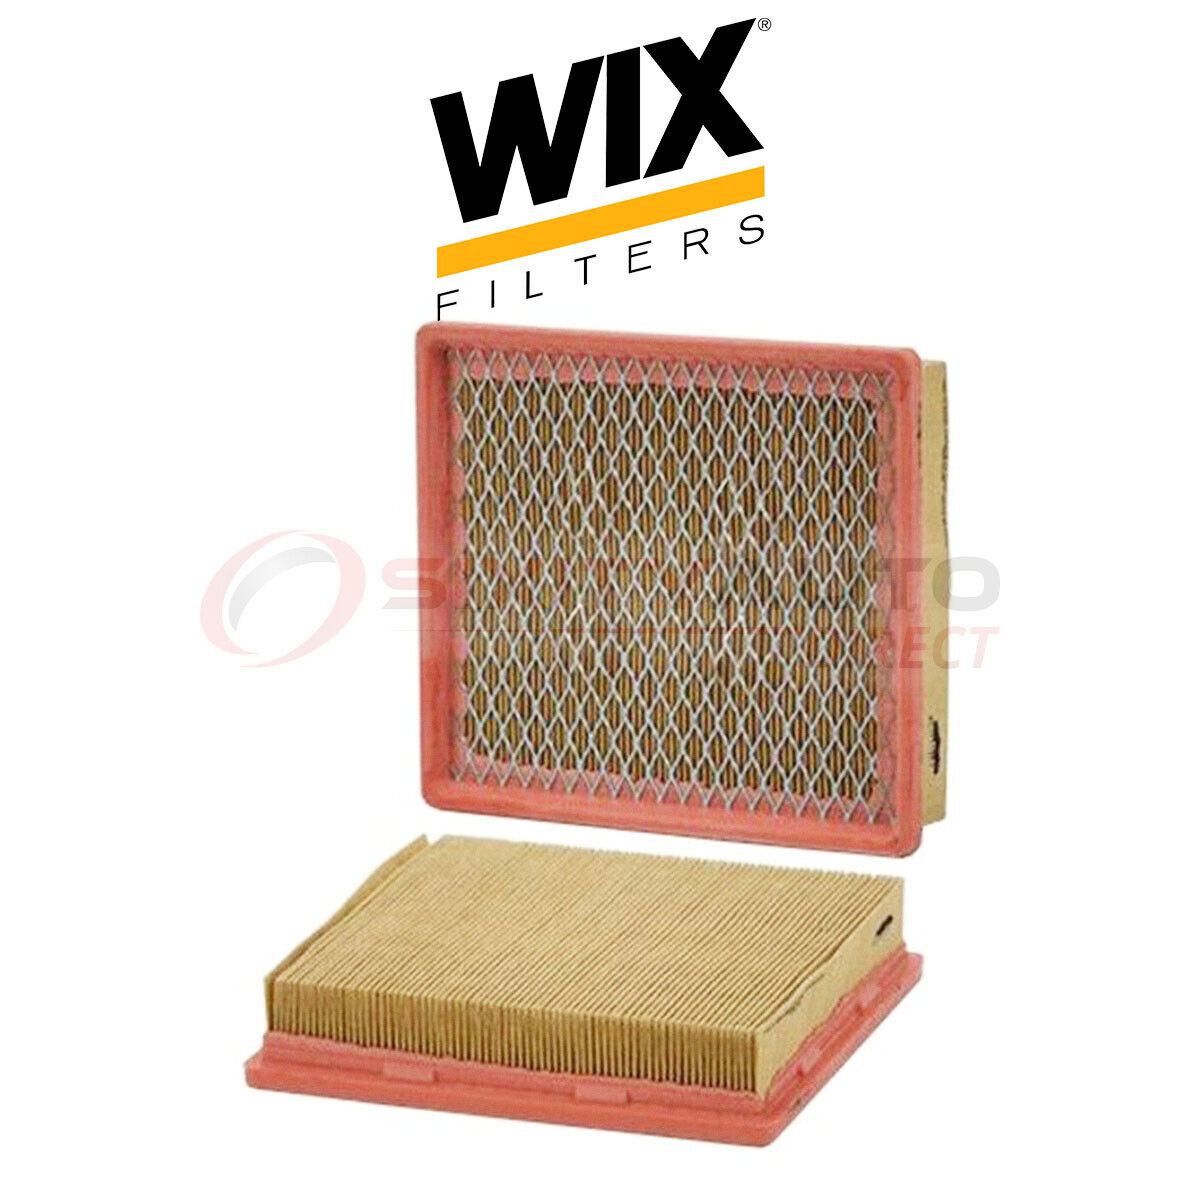 WIX Air Filter for 1984-1991 Ford Tempo 2.3L L4 - Filtration System lq